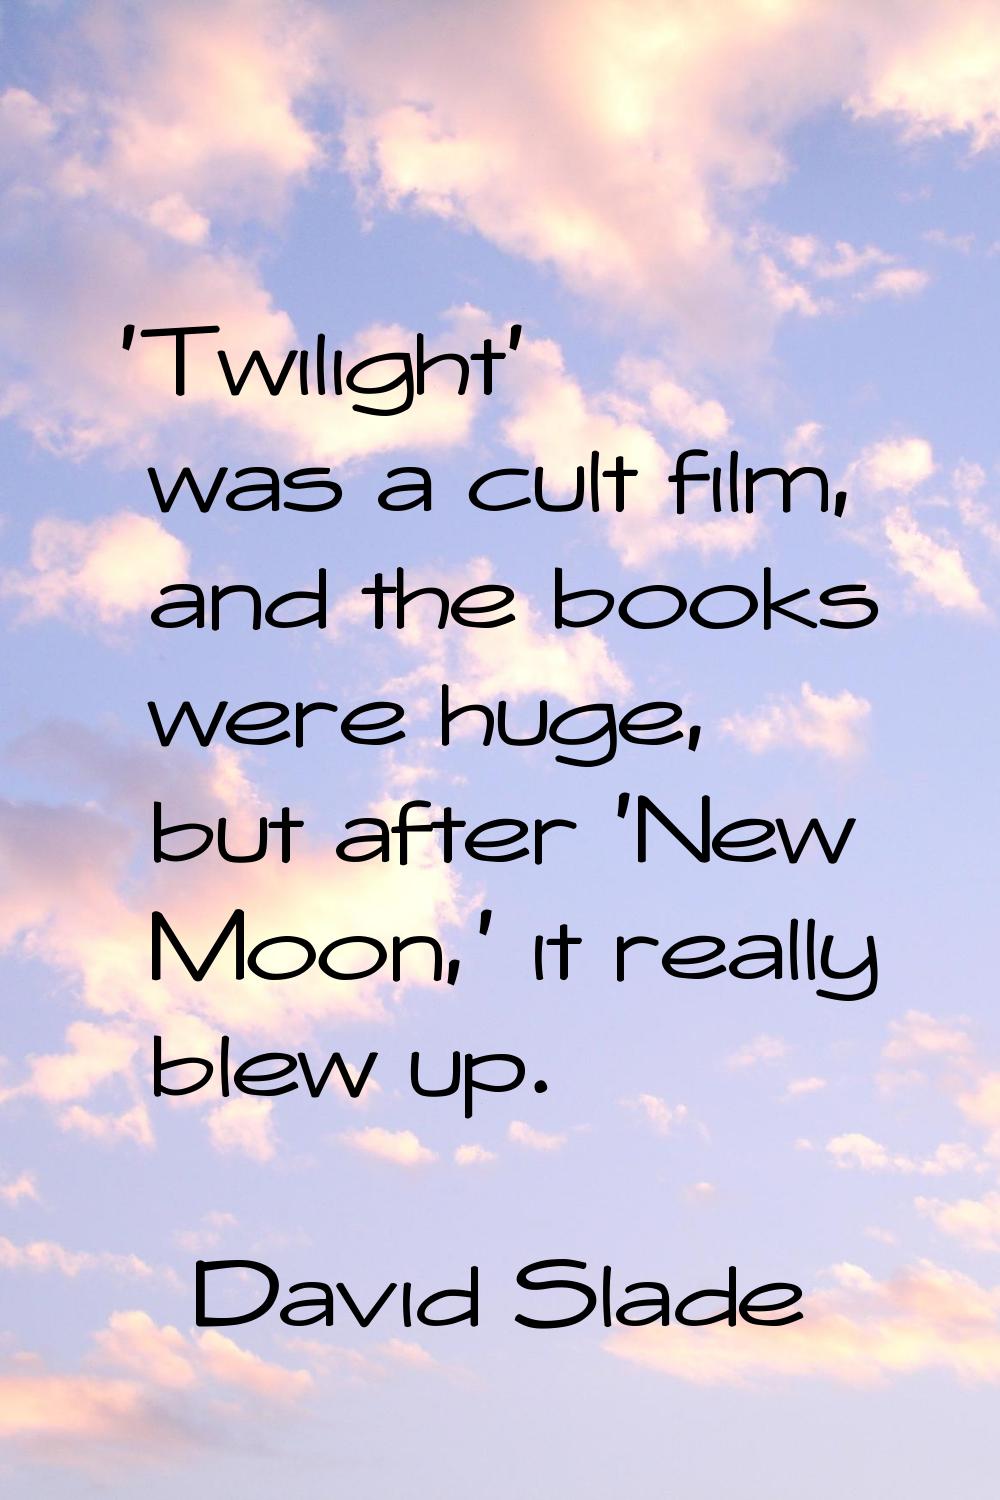 'Twilight' was a cult film, and the books were huge, but after 'New Moon,' it really blew up.